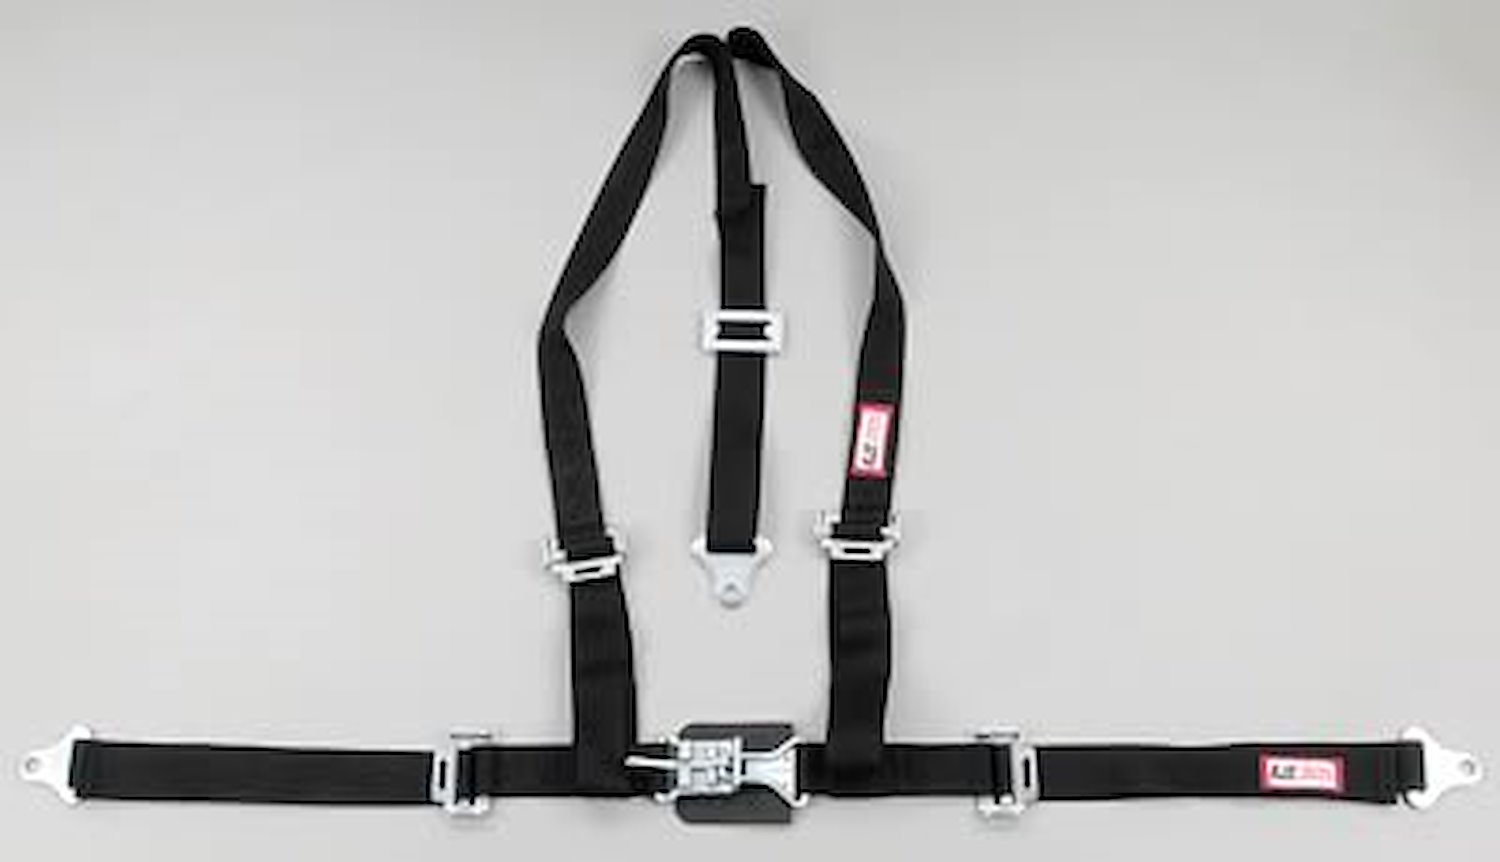 NON-SFI L&L HARNESS 2 PULL UP Lap Belt SNAP SEWN IN 2 S.H. Y FLOOR Mount w/STERNUM STRAP WRAP/SNAP HOT PINK